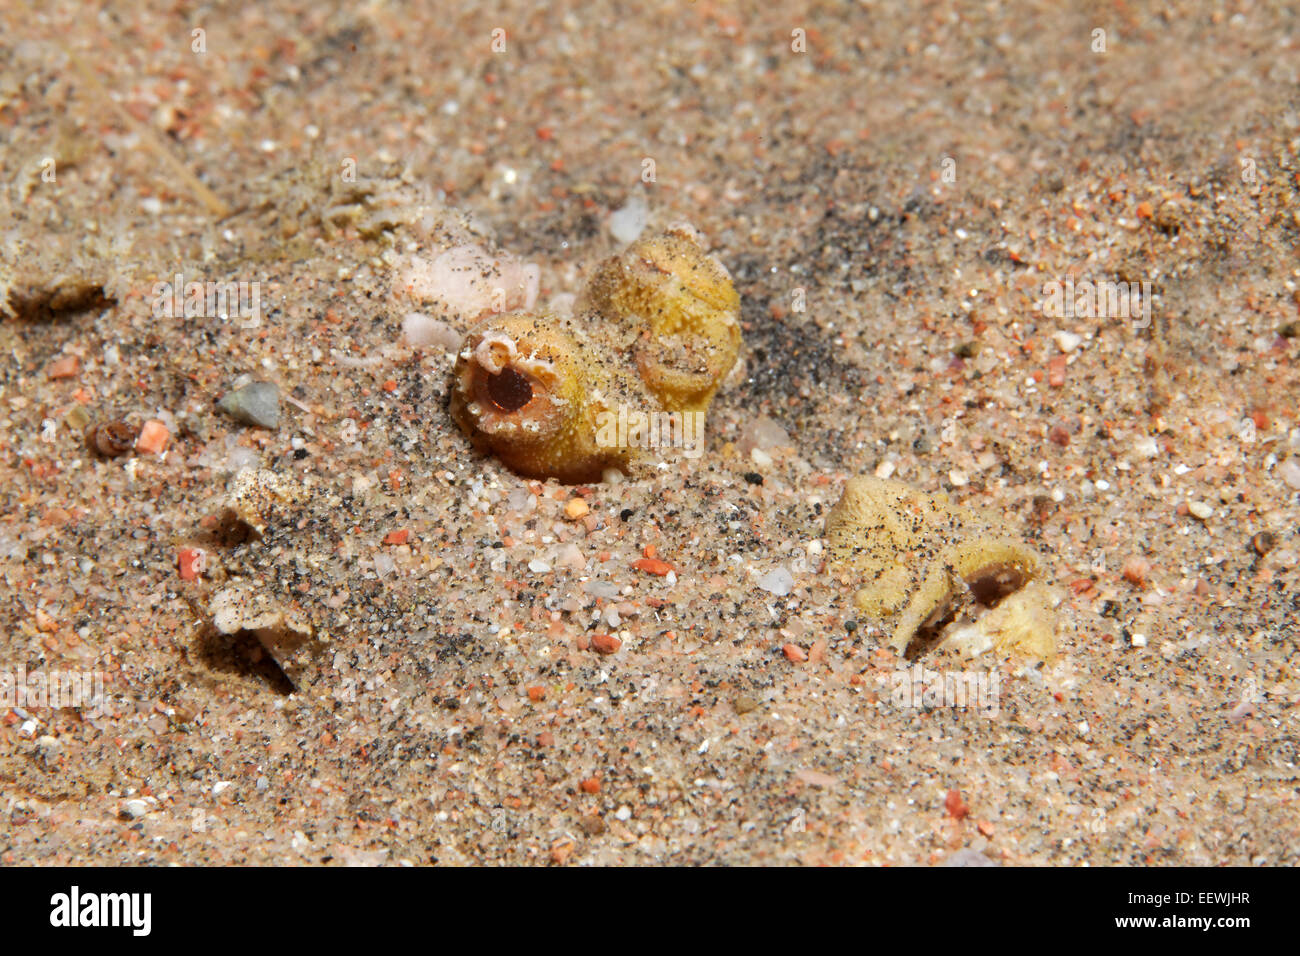 Filament-finned Stinger, Two-stick Stingfish or Devil Scorpionfish (Inimicus filamentosus), camouflaged, buried in the sand Stock Photo